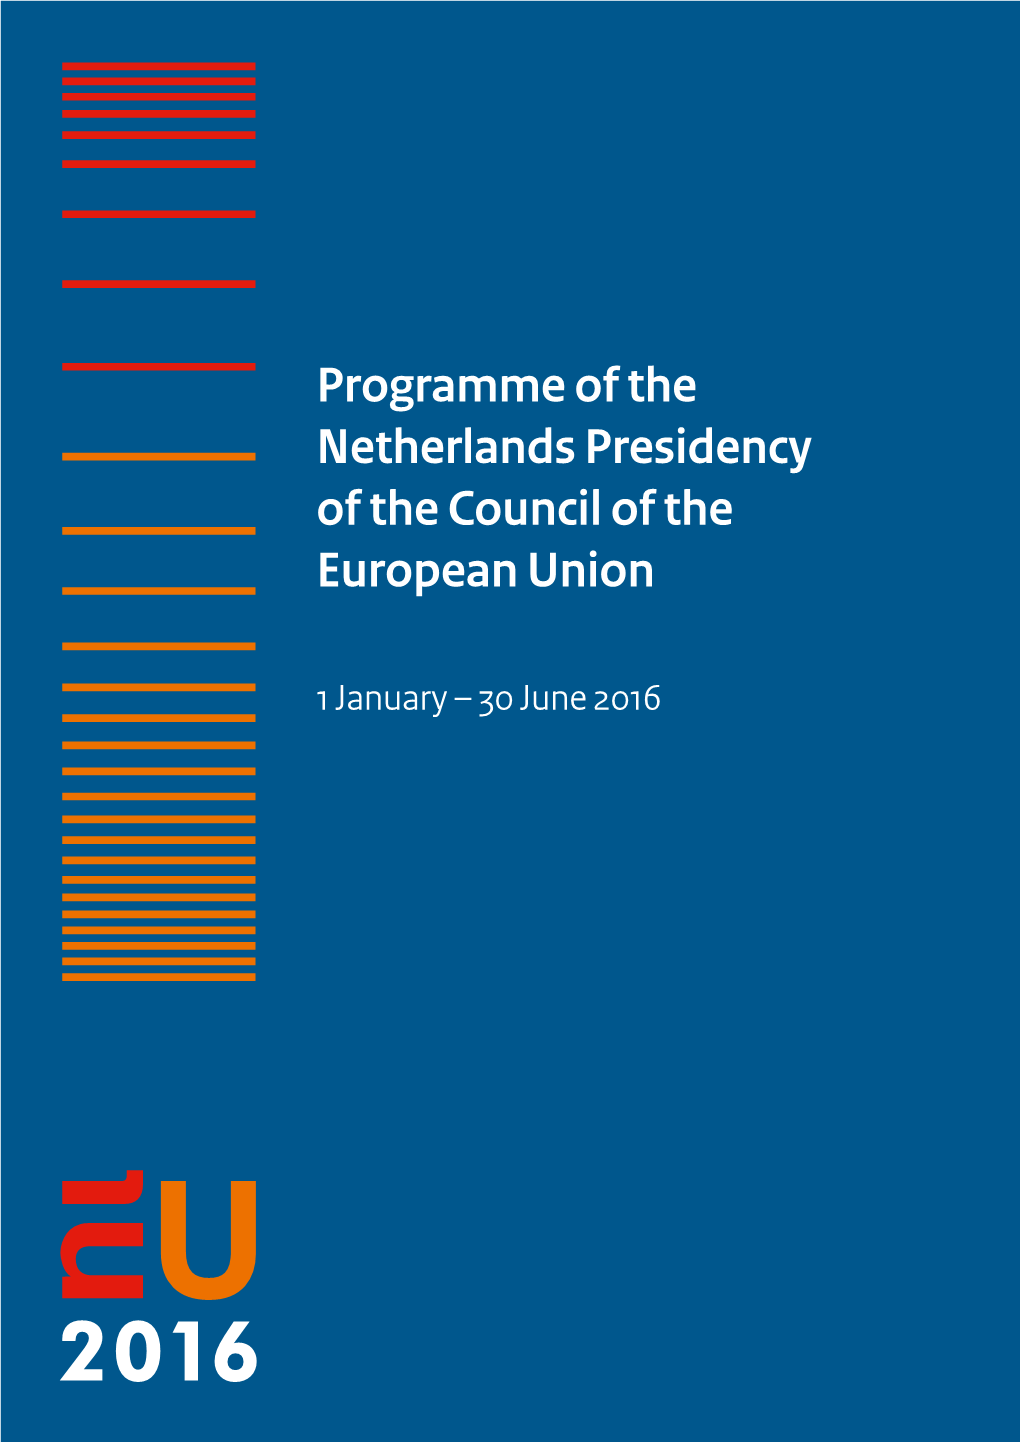 Programme of the Netherlands Presidency of the Council of the European Union